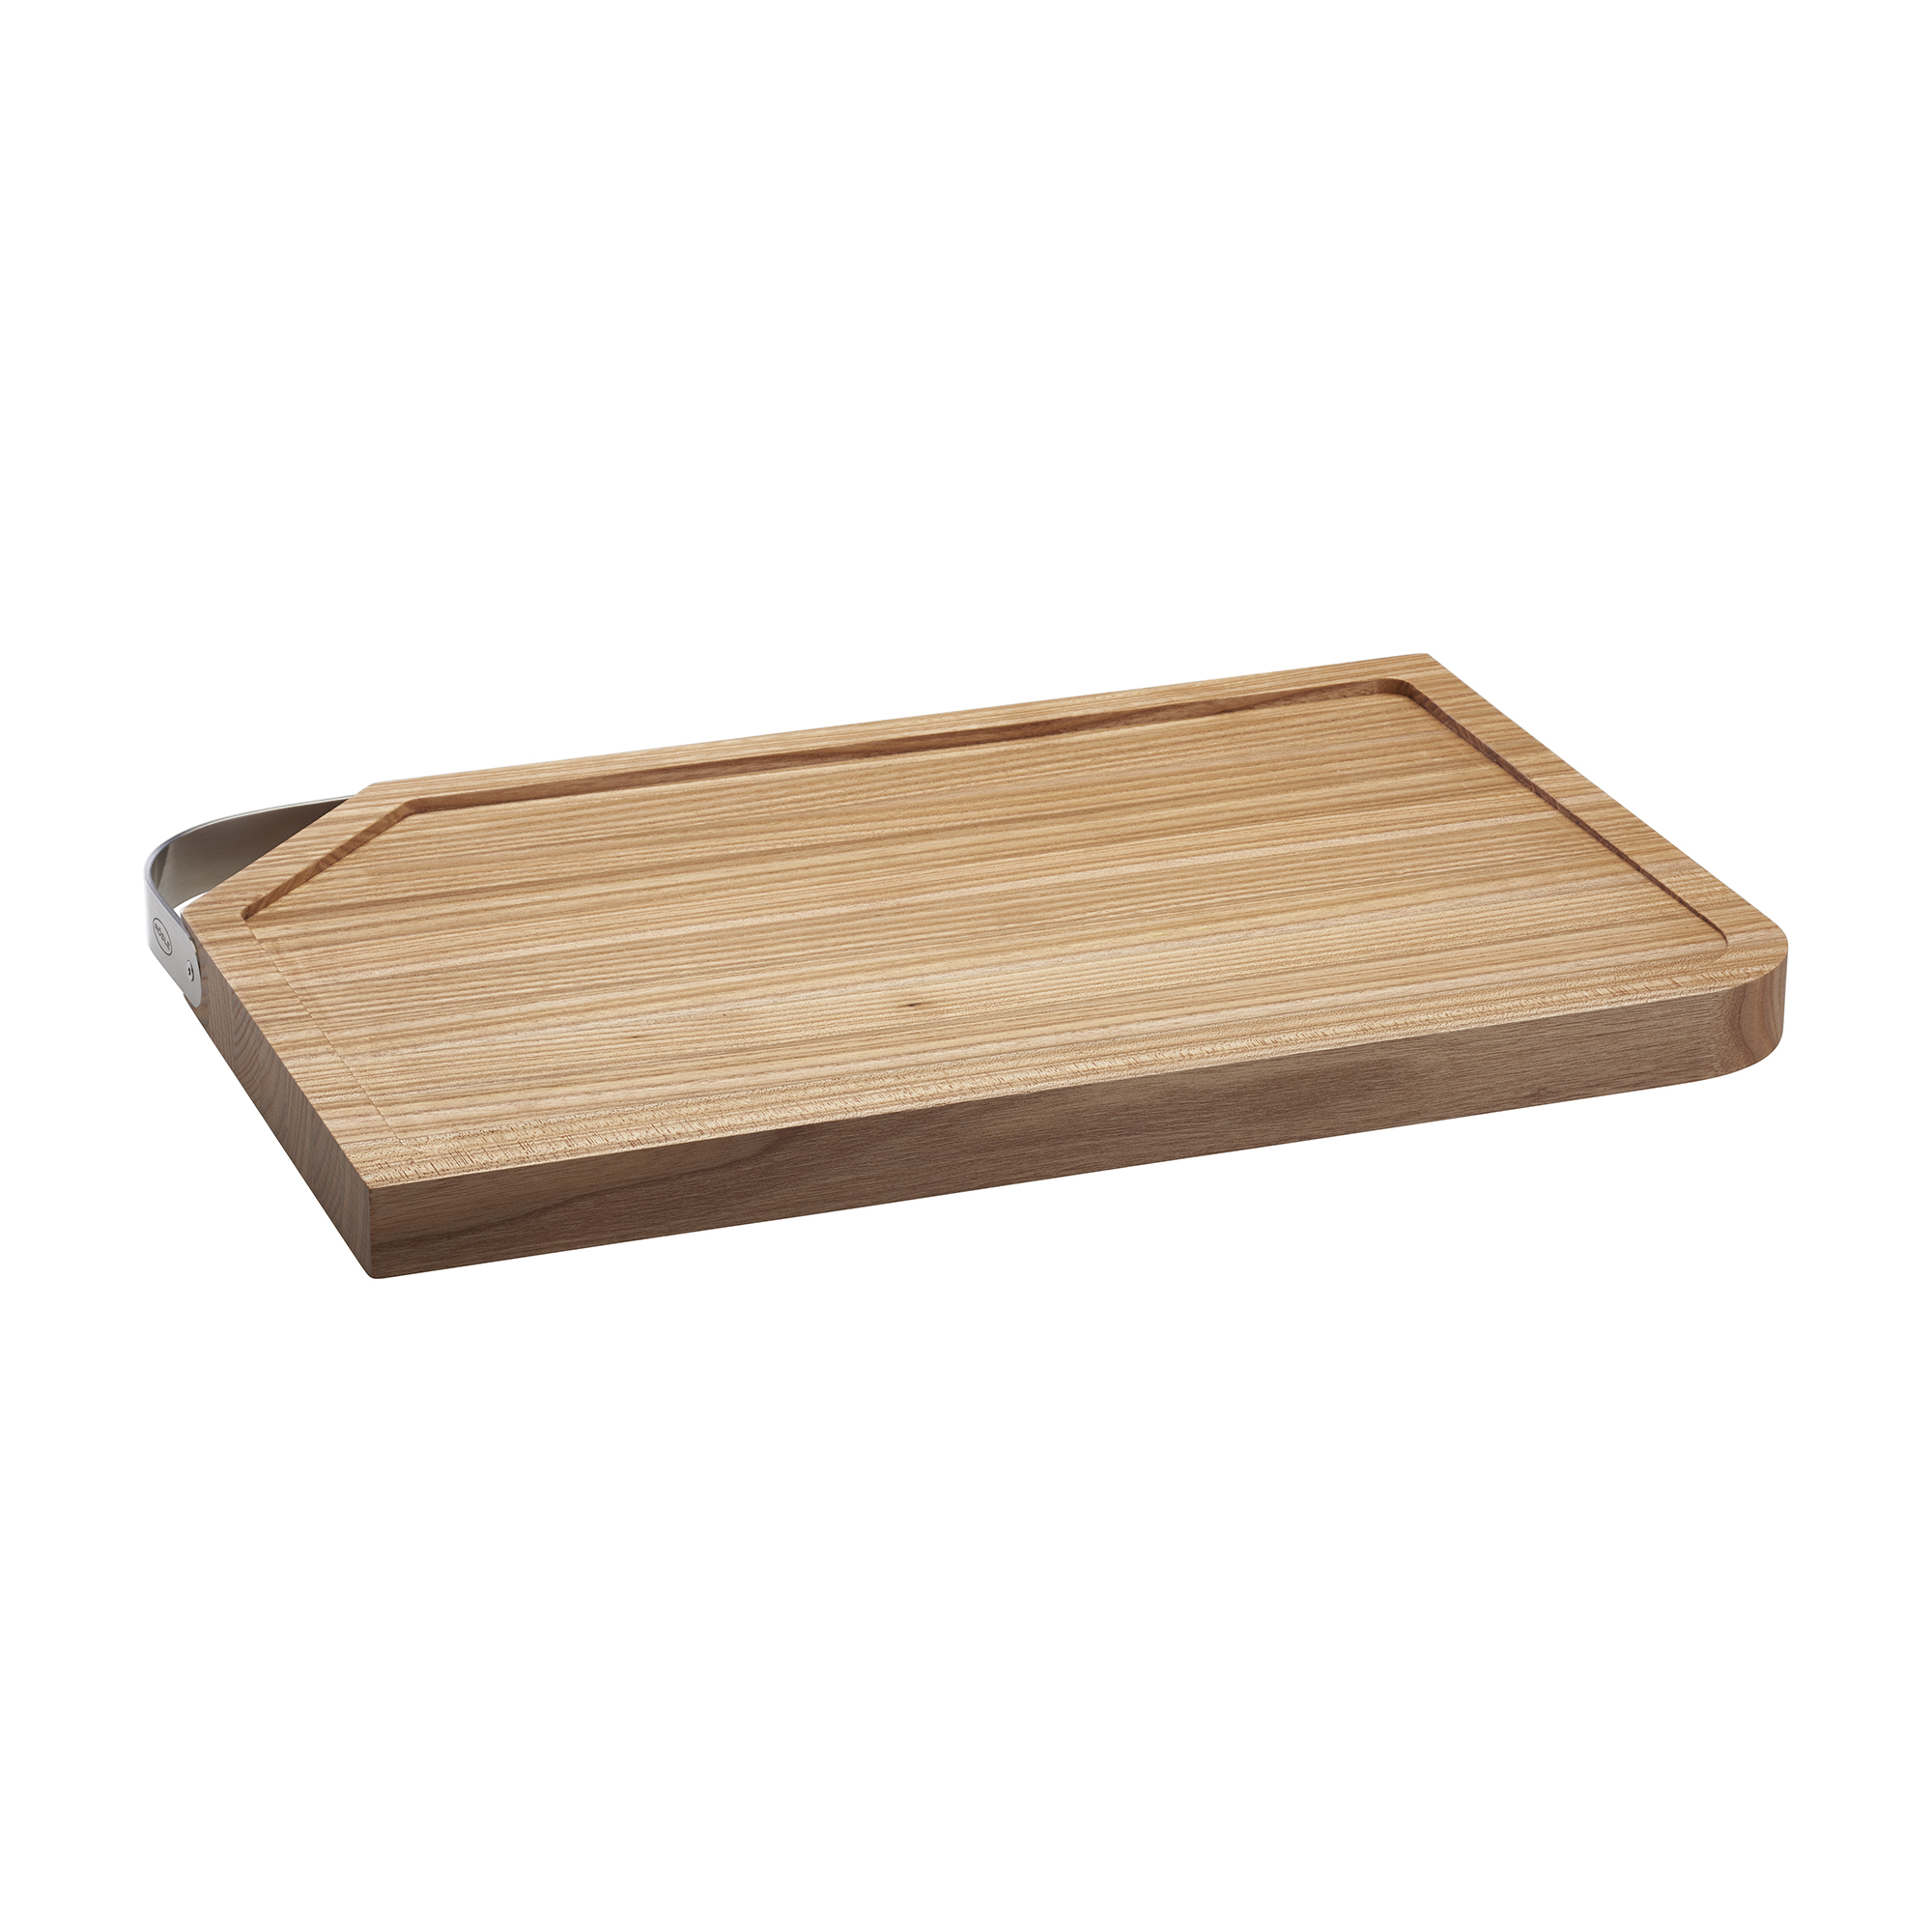 Cutting Board 36x24cm | 14.2 x 9.5 in.with stainless steel handle